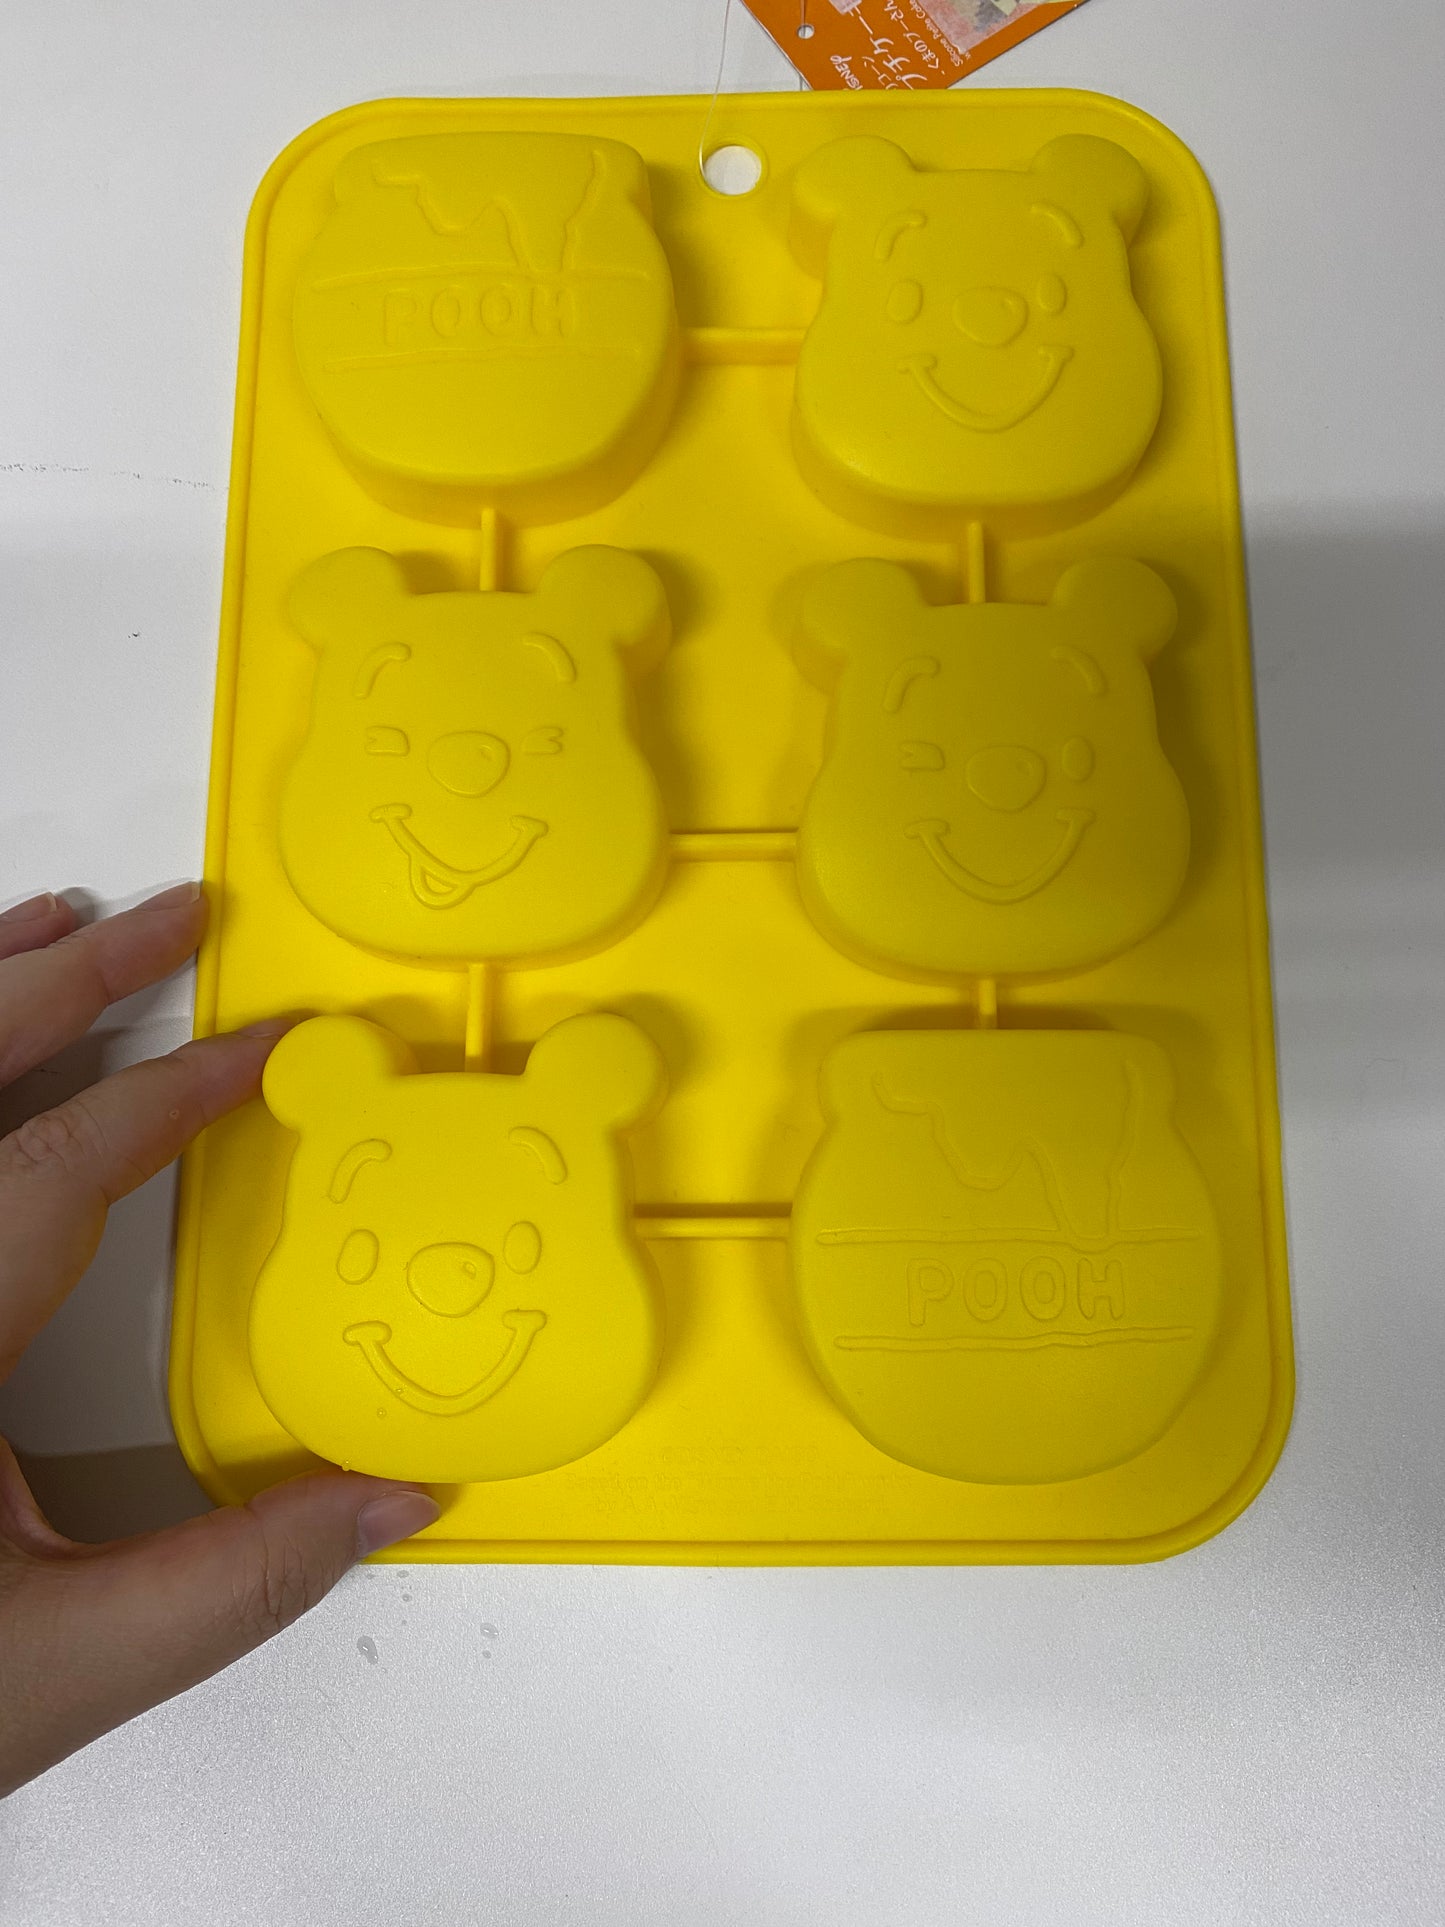 Japan Disney Winnie The Pooh with Honey Silicone Petite Cake Chocolate Ice Jelly Candle Mold